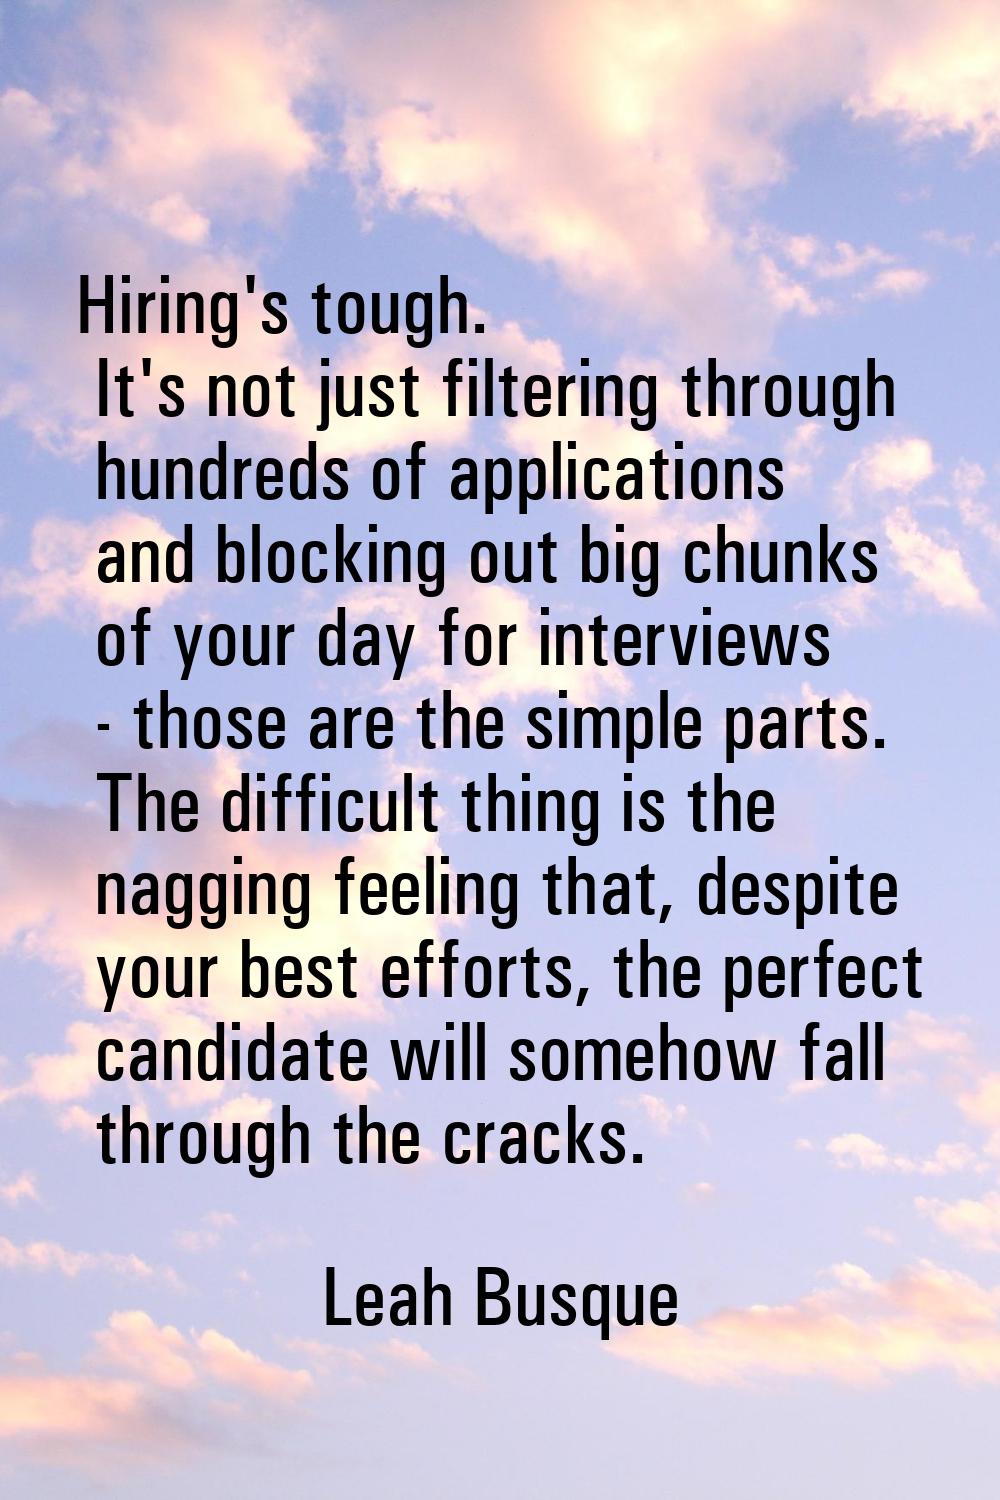 Hiring's tough. It's not just filtering through hundreds of applications and blocking out big chunk